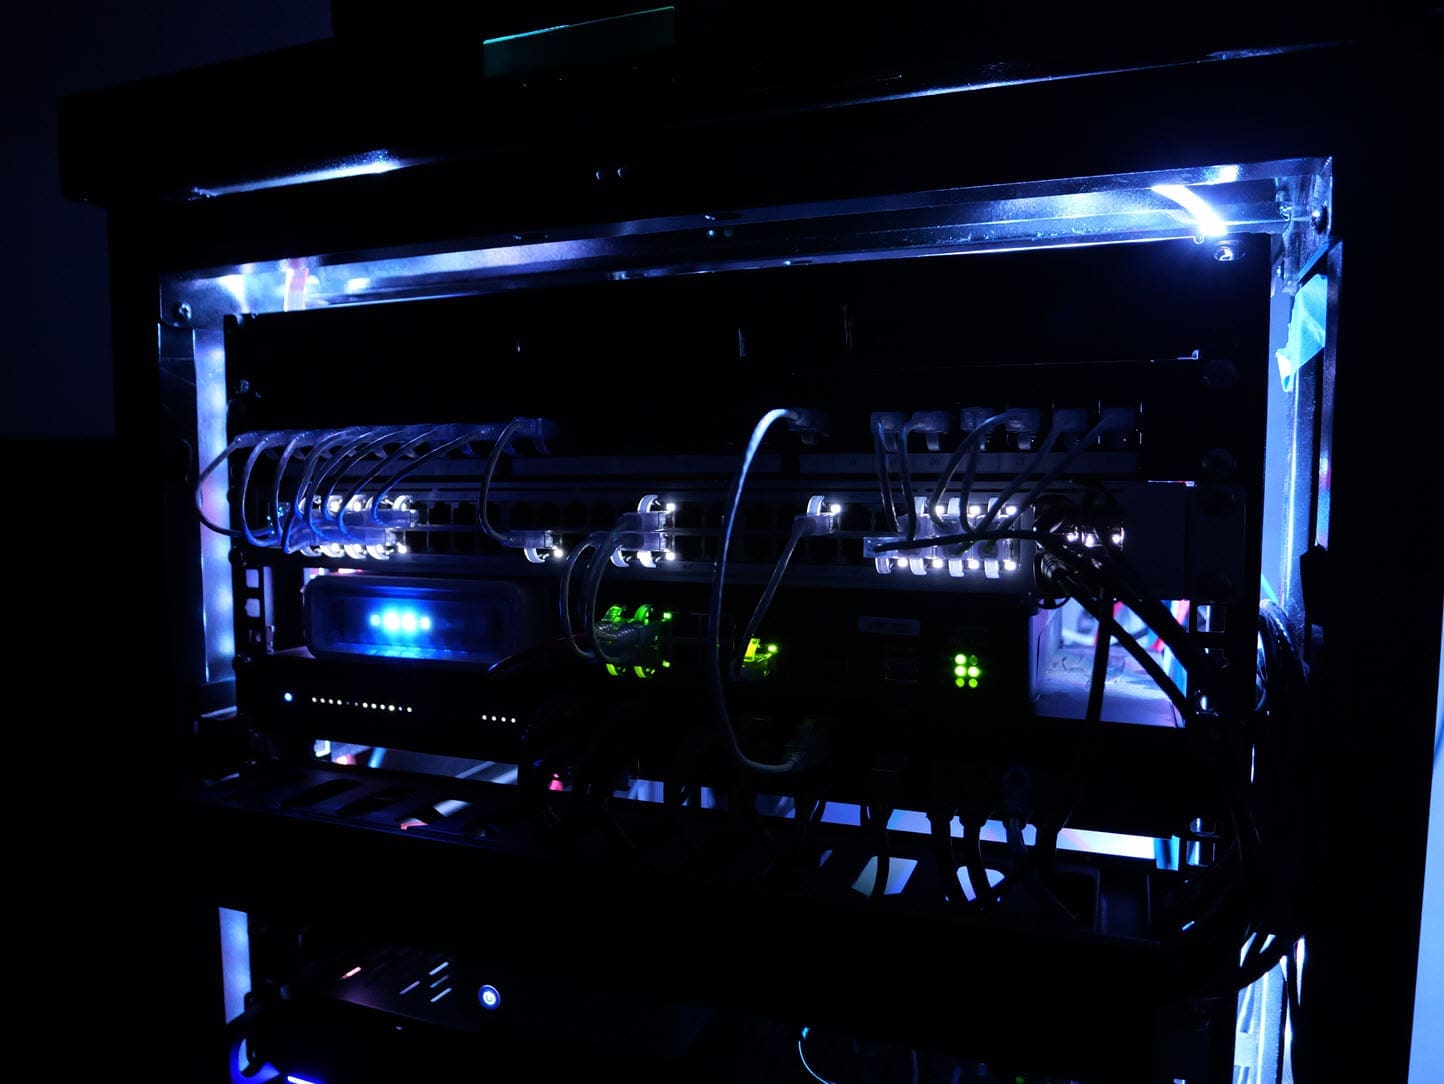 Dark mode front of the server rack with a view of the unifi 48 port switch